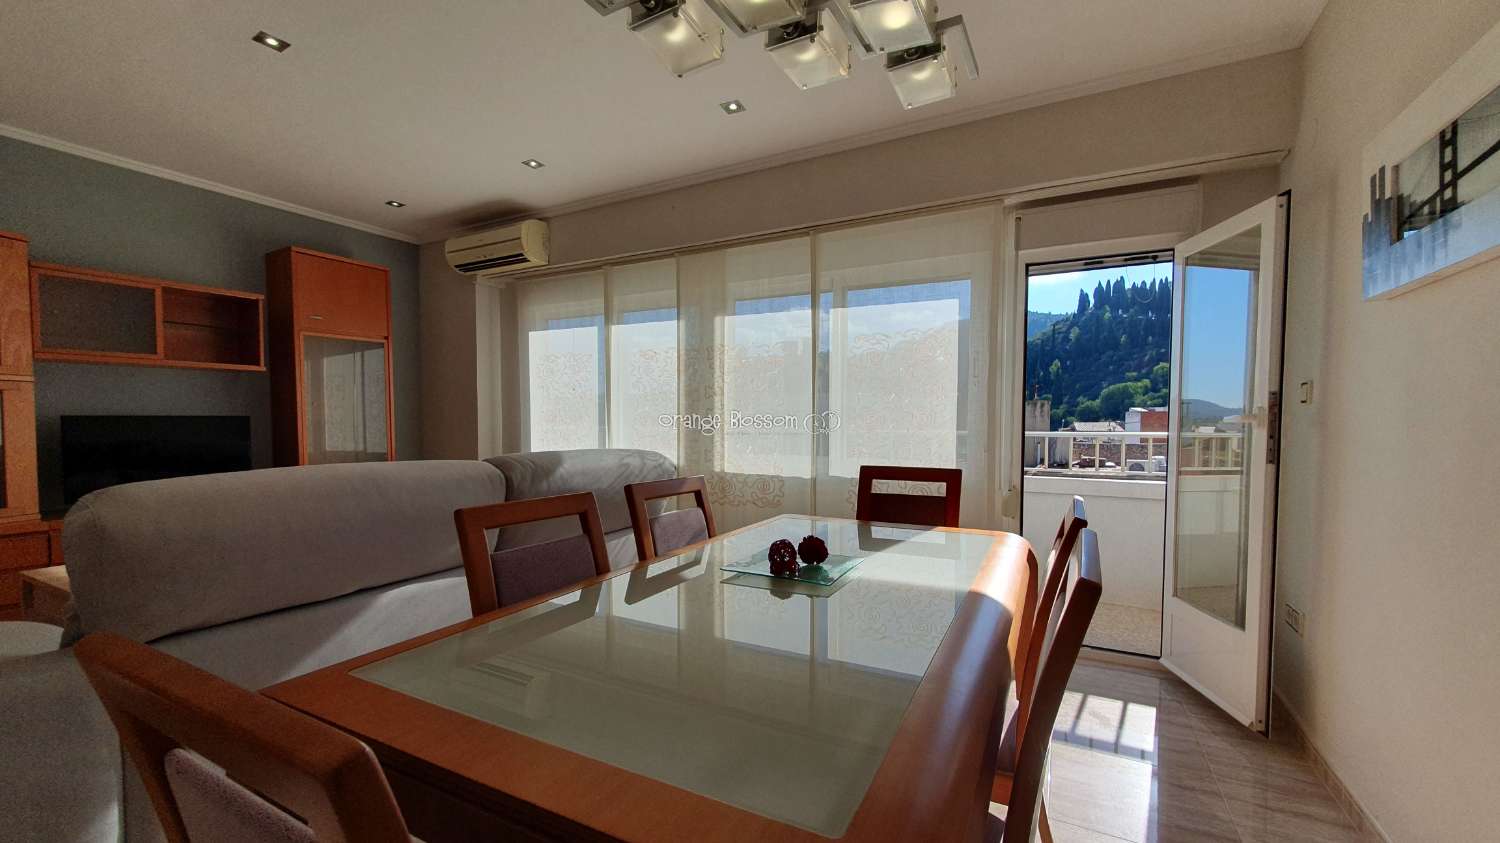 A Bright and Modern 3-Bedroom Apartment with Mountain Views